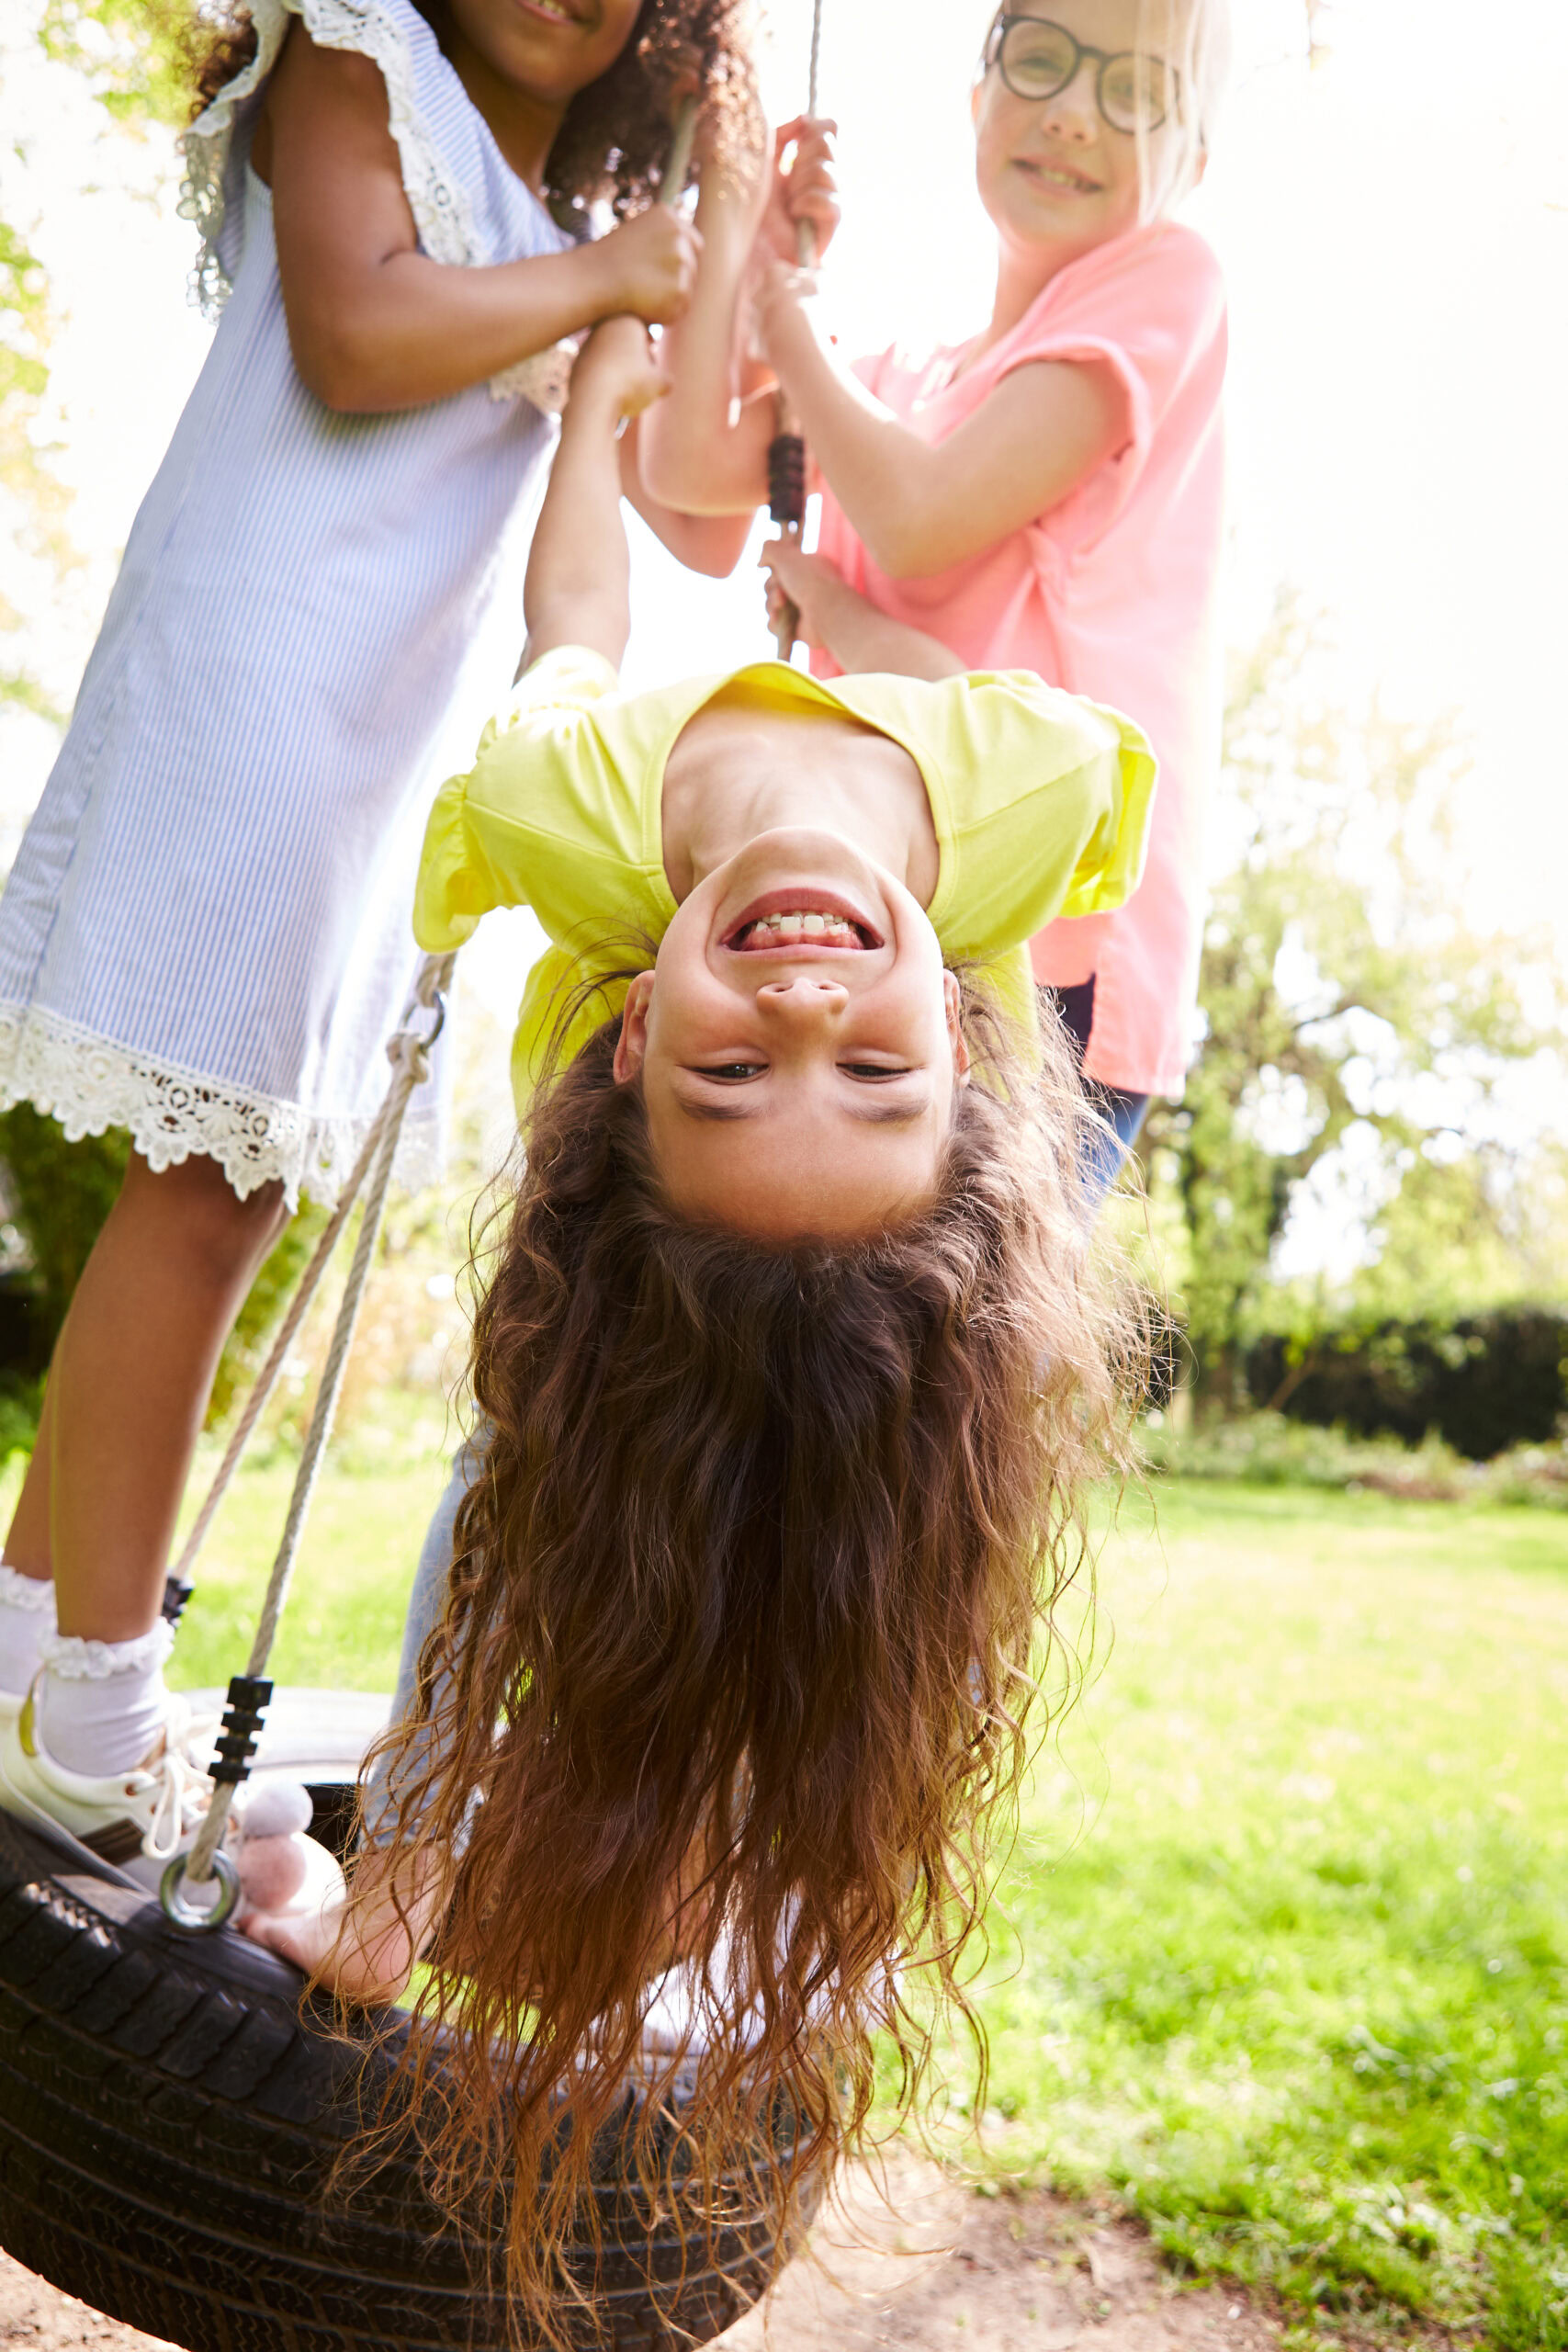 Group Of Girls Having Fun With Friends Playing On Tire Swing In Garden